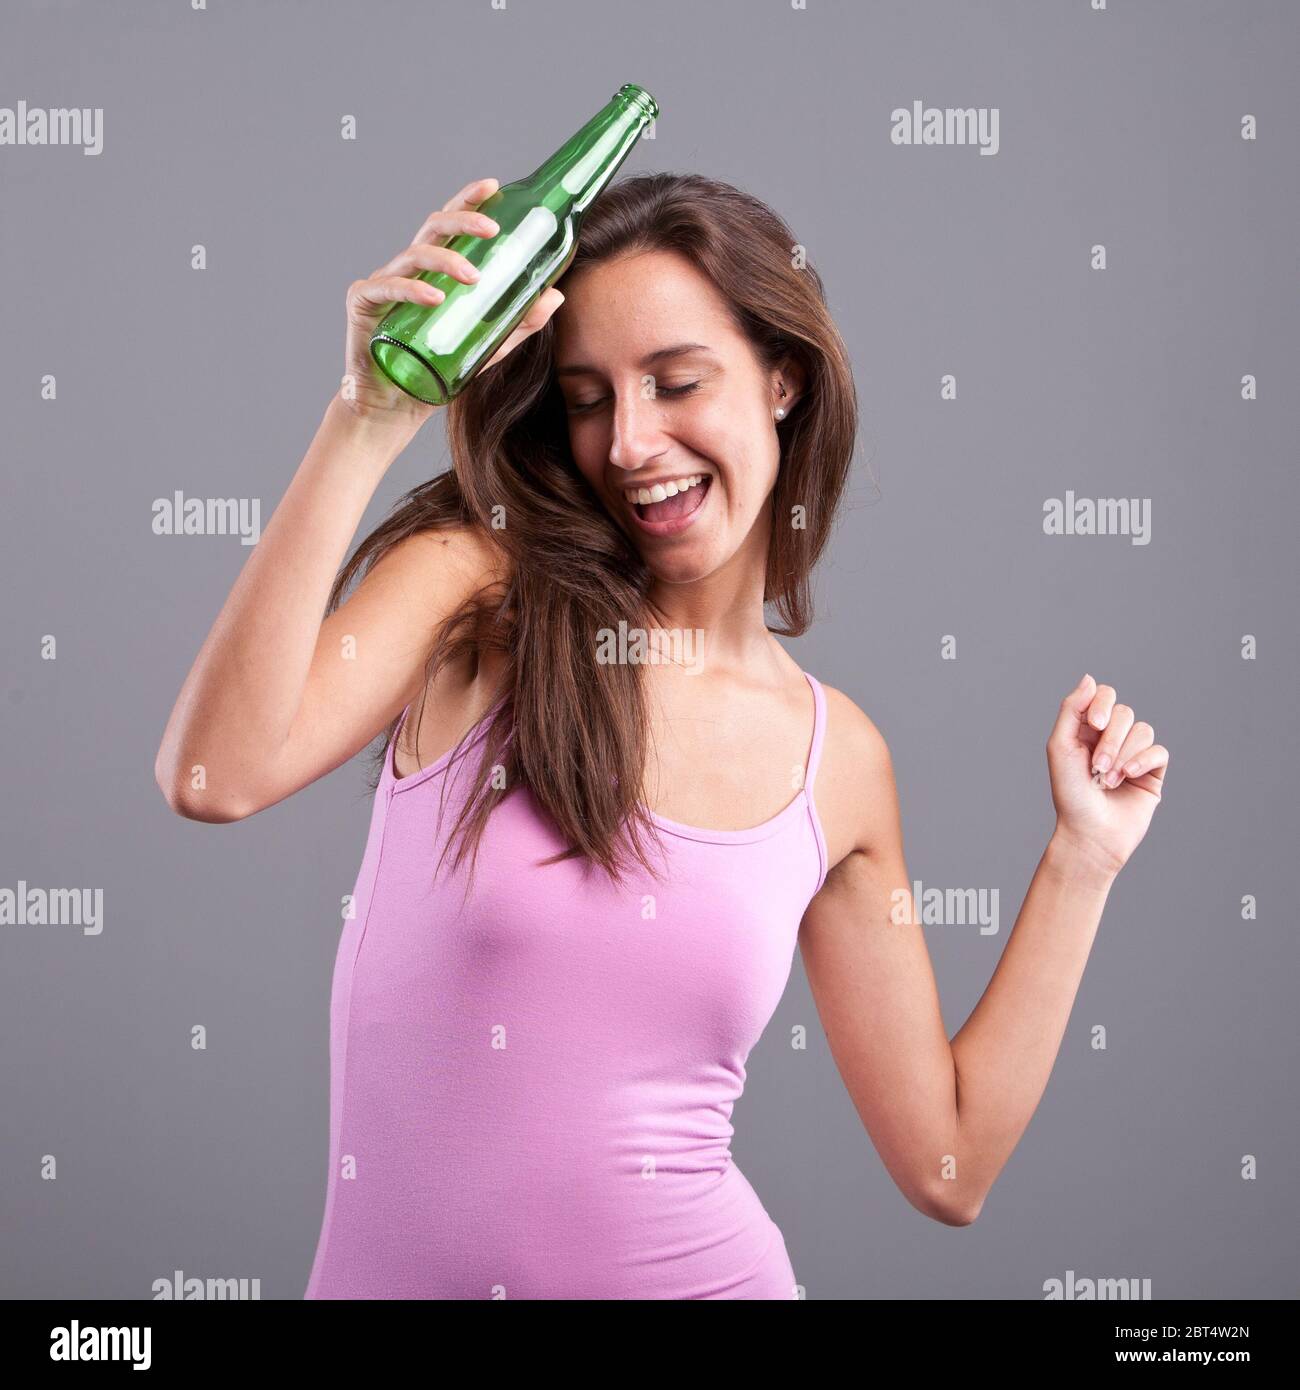 drink, drinking, bibs, party, celebration, beer, nightlife, drunk, delighted, Stock Photo